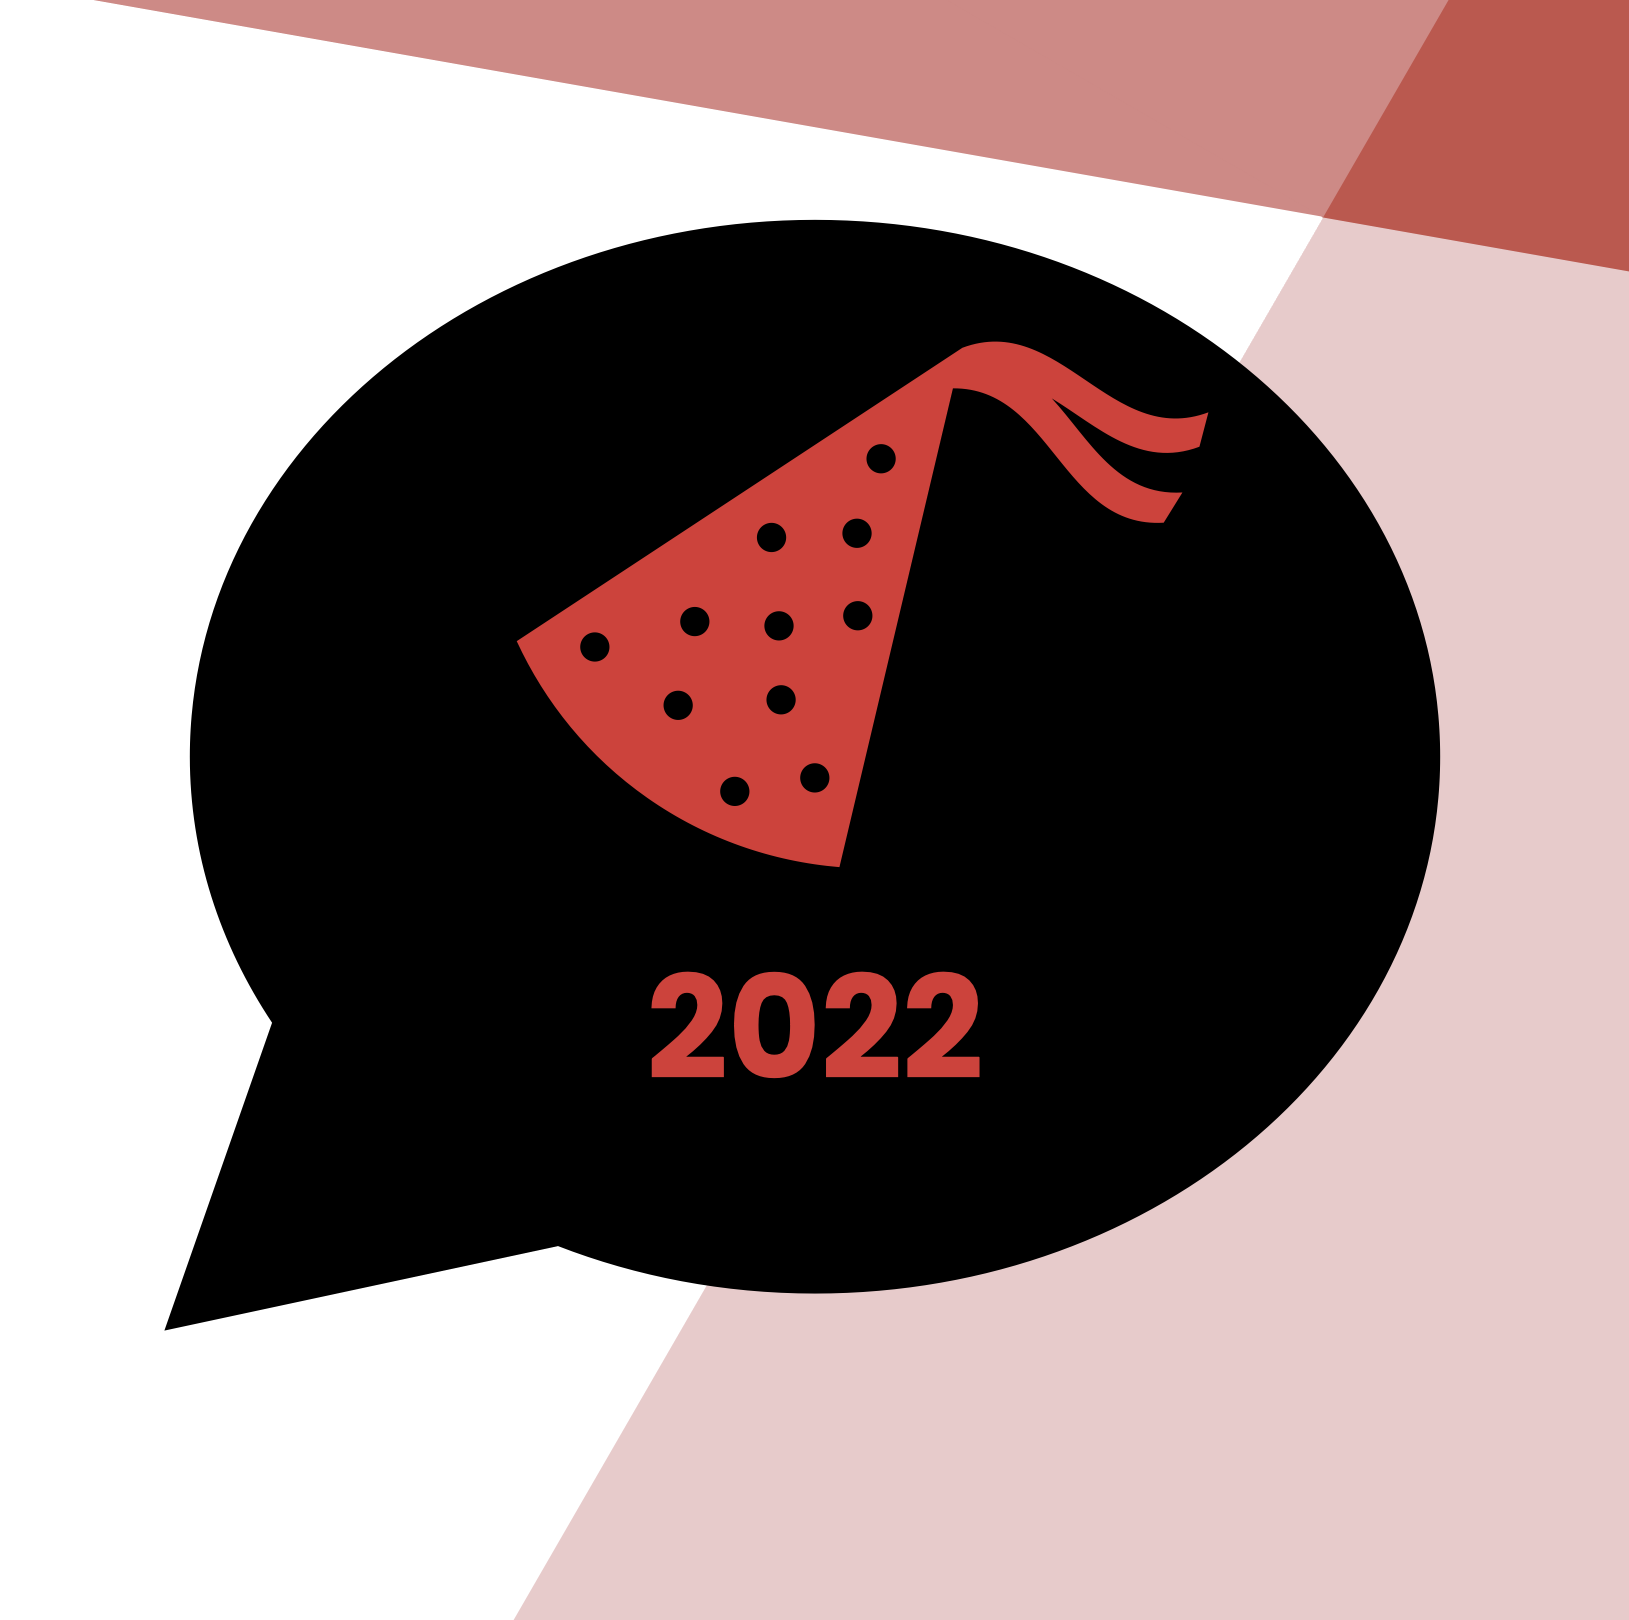 Speech bubble with party hat and 2022 inscribed